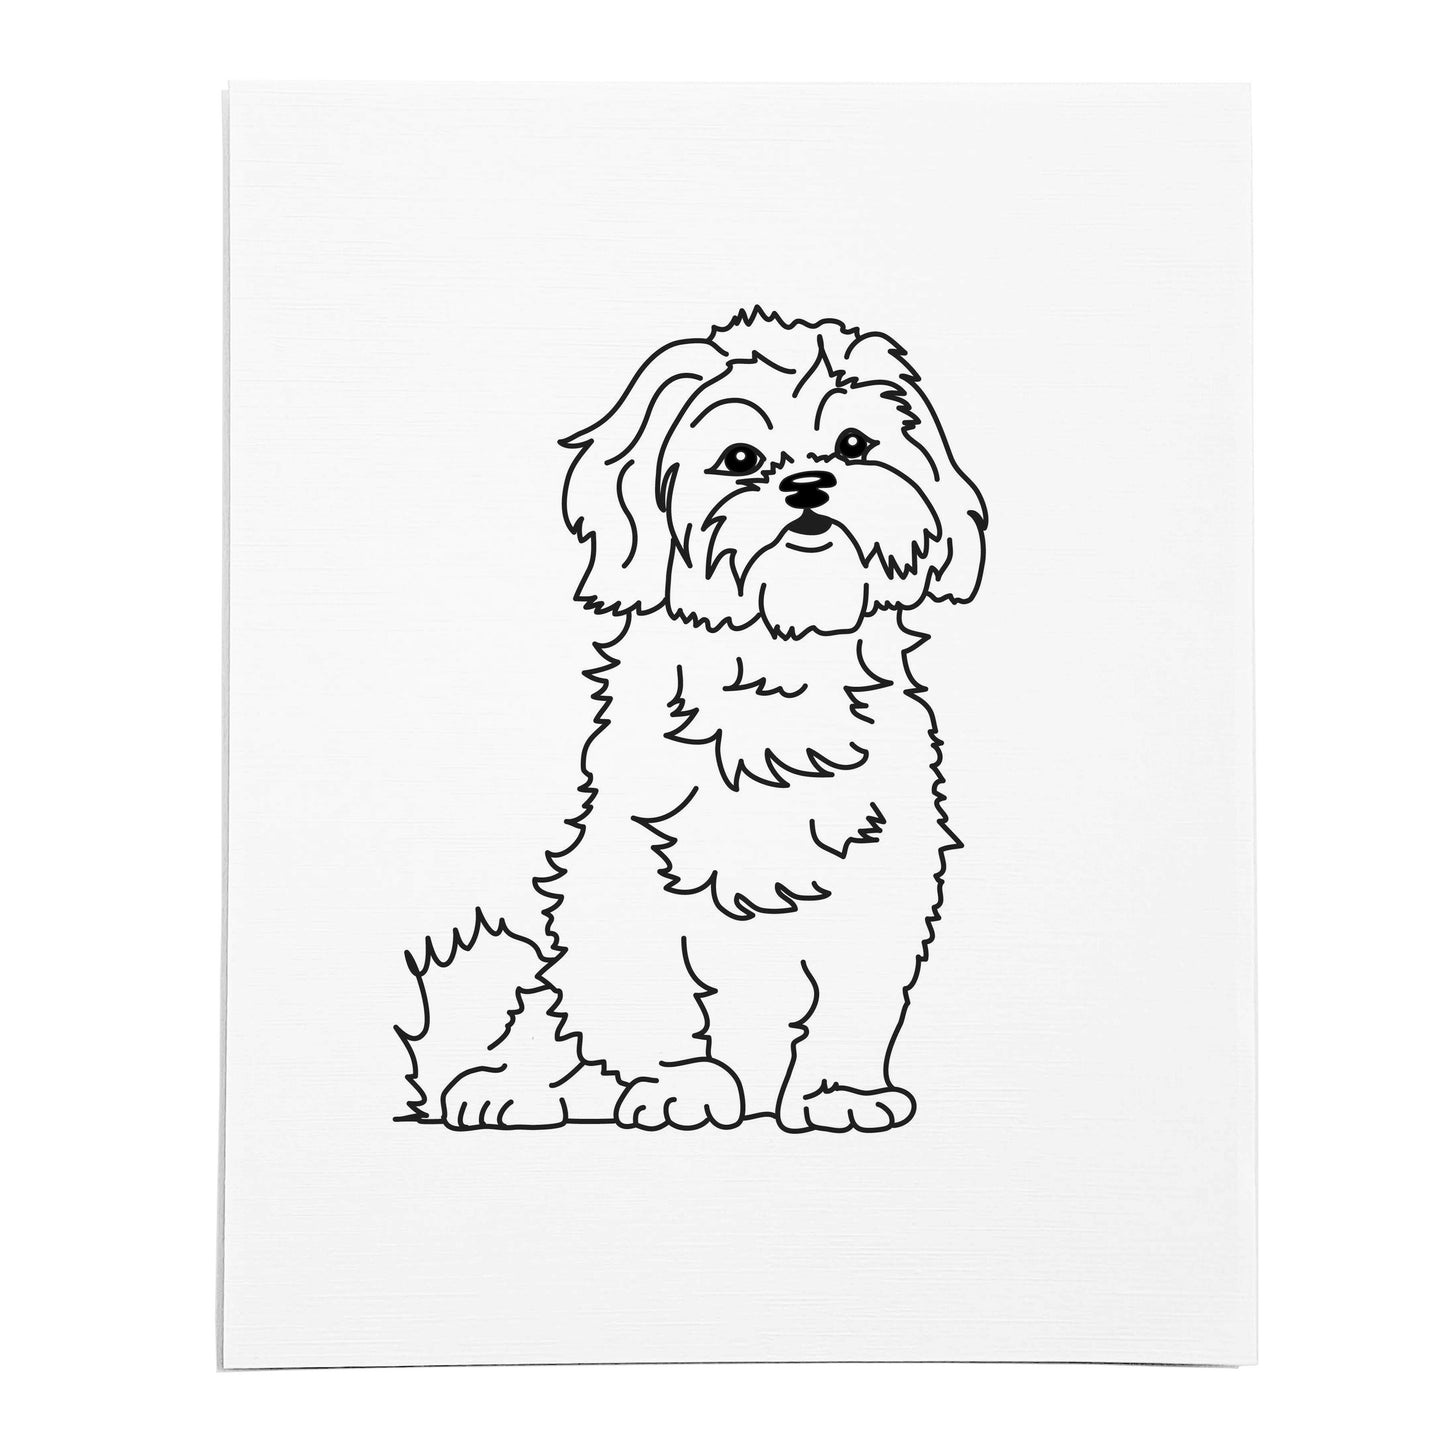 An art print featuring a line drawing of a Shih Tzu dog on white linen paper